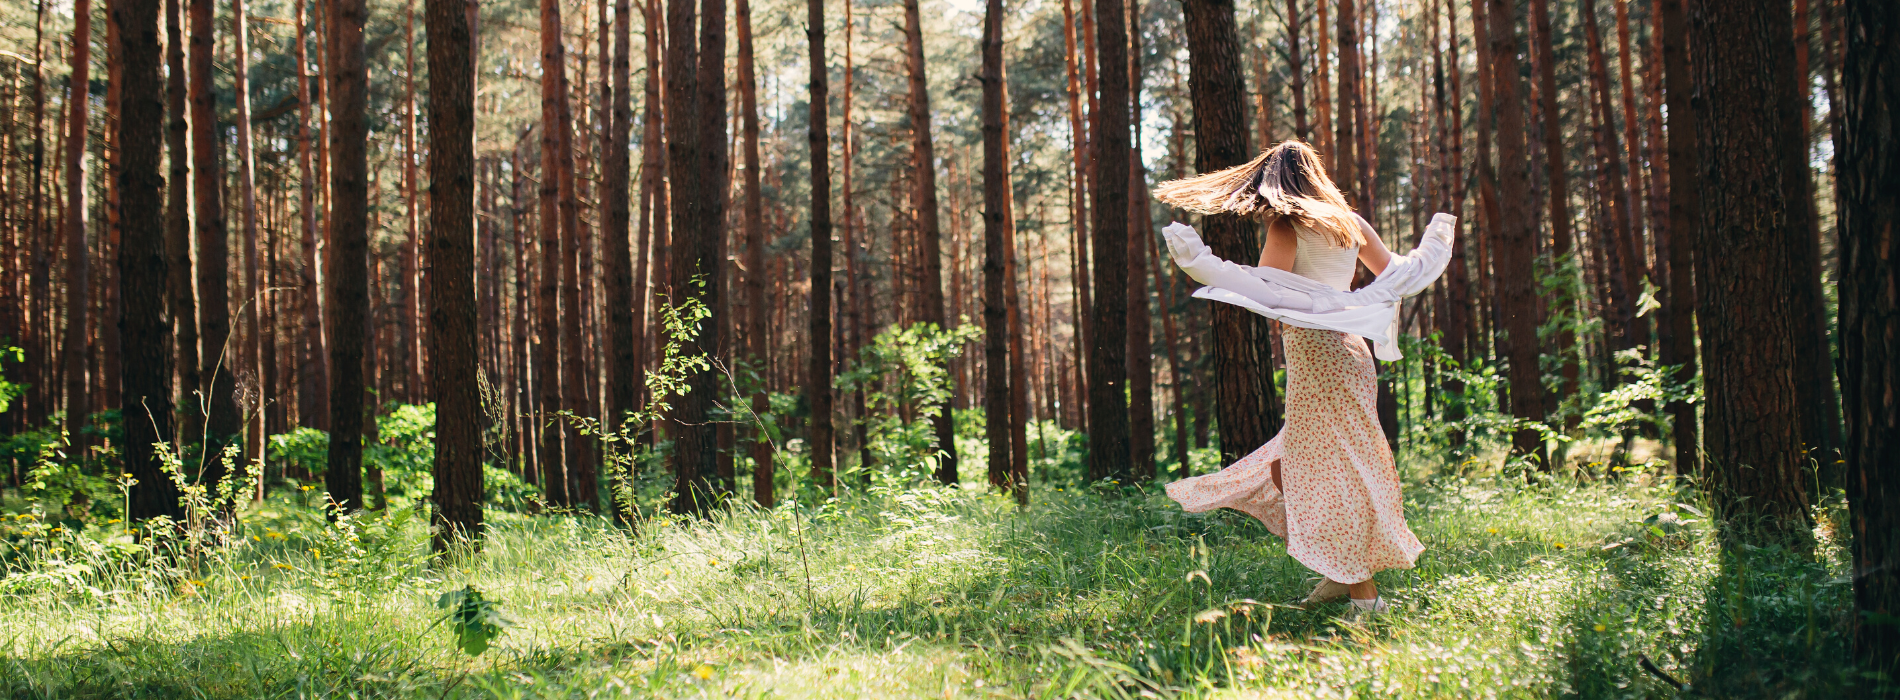 Forest to Face® skincare Anato Life Forest Bathing